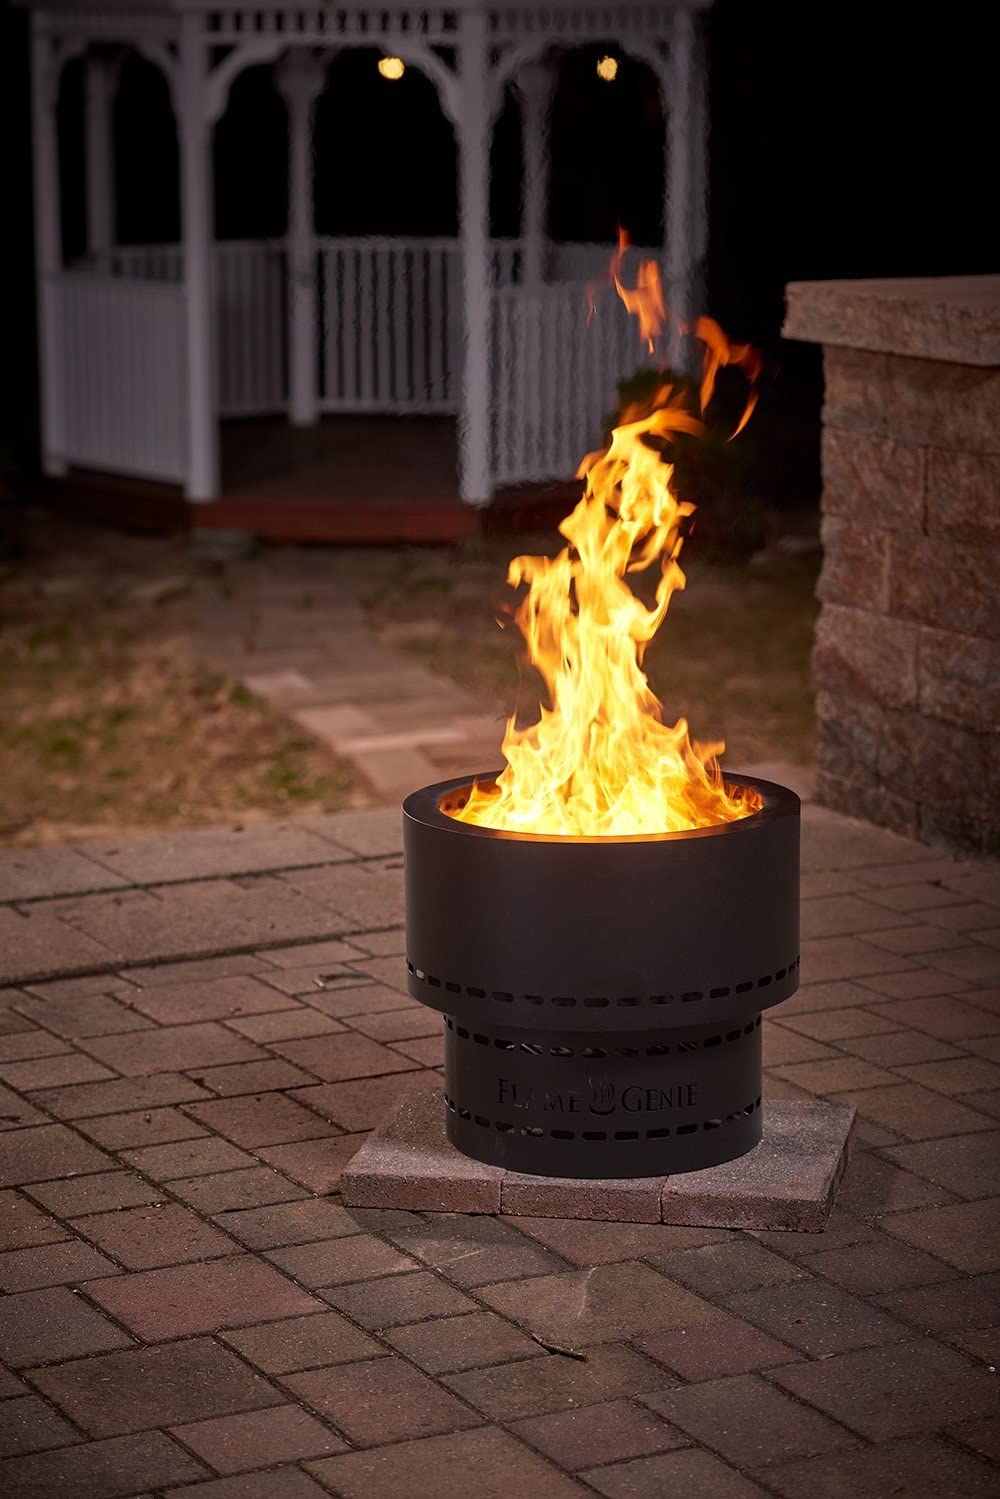 Flame Genie Portable Smoke-Free Inferno Wood Pellet Fire Pit Placed Outside with Fire